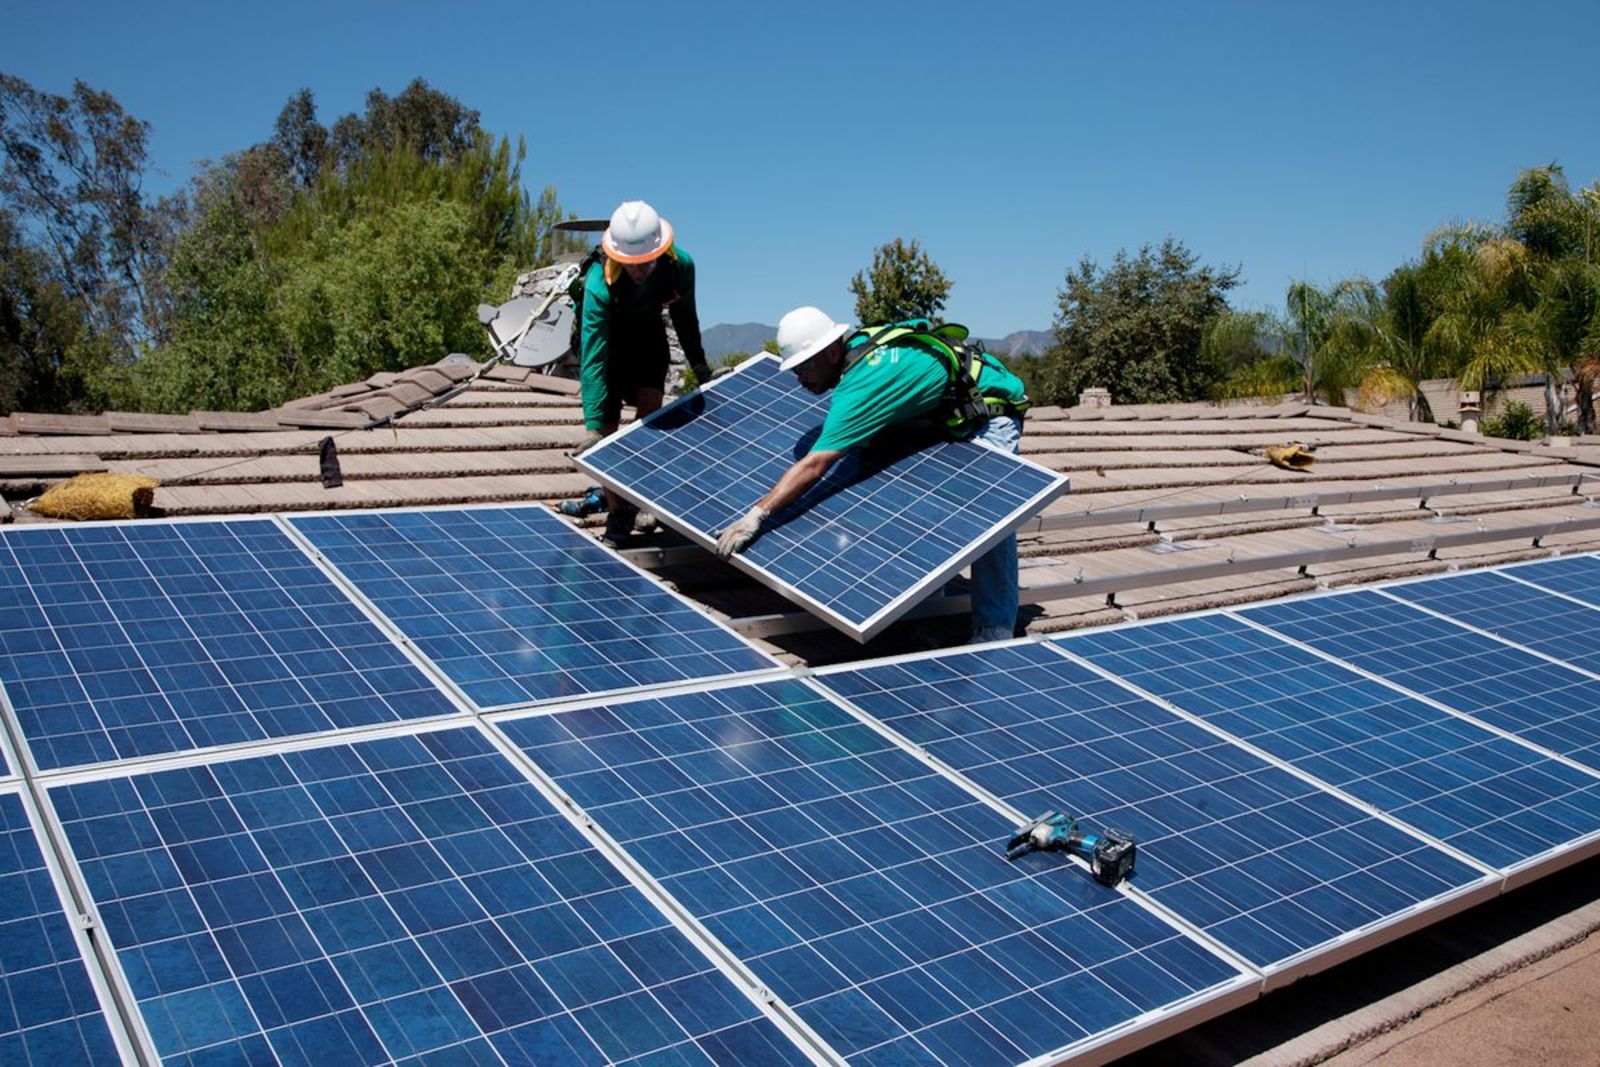 What mistakes should you avoid when installing solar panels?